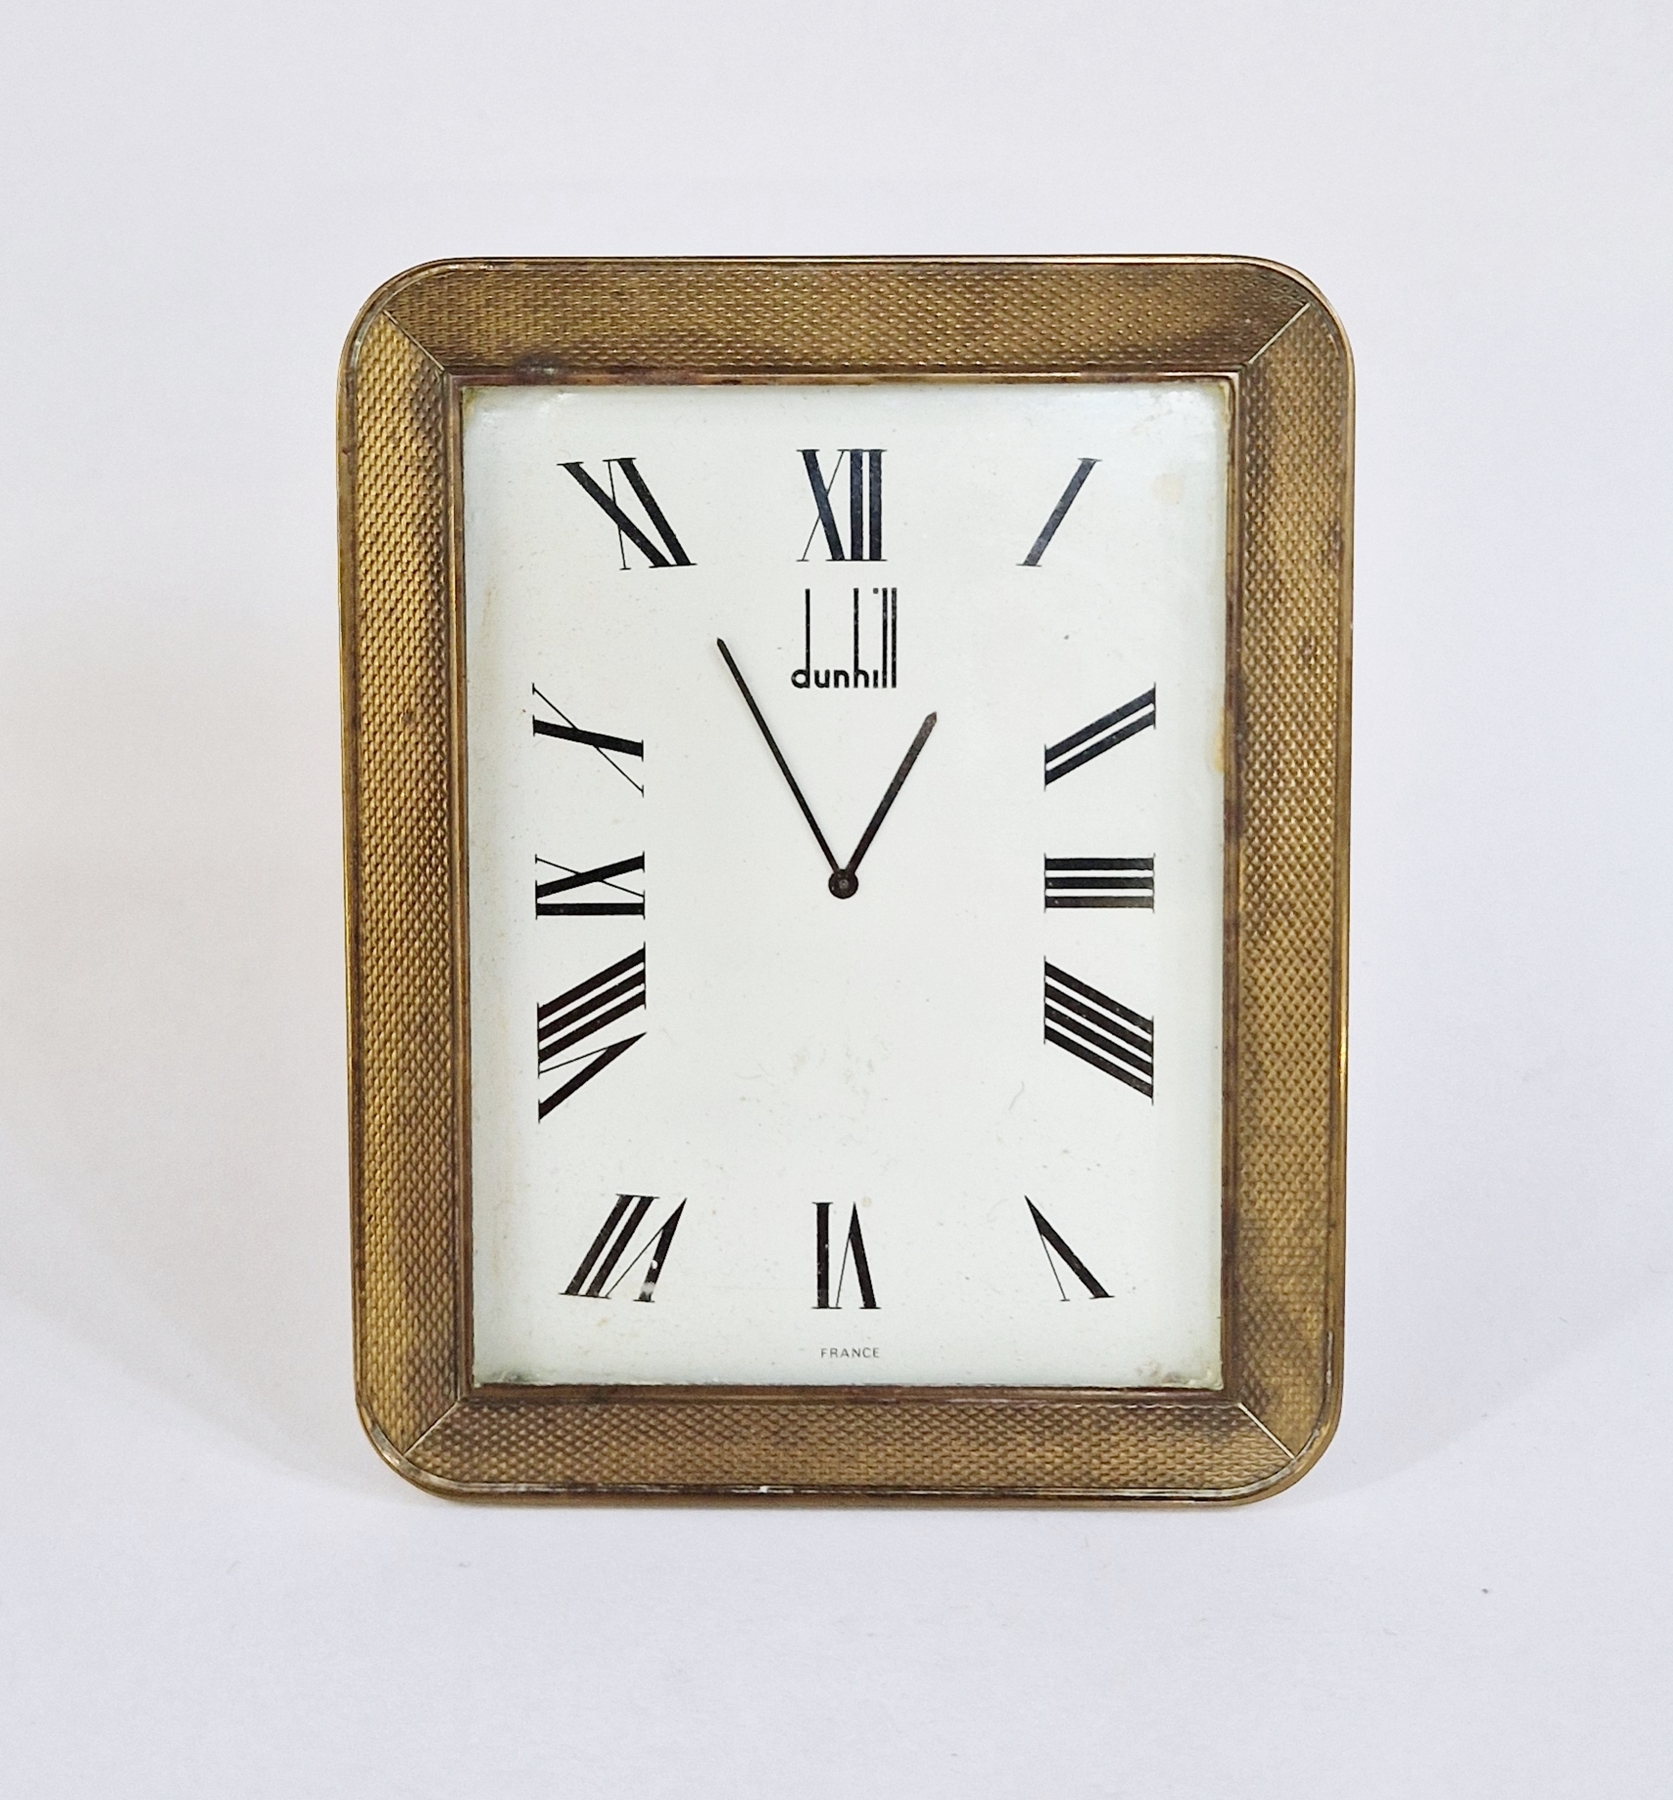 Dunhill brass desk clock, rectangular with rounded corners, engine-turned frame to the white